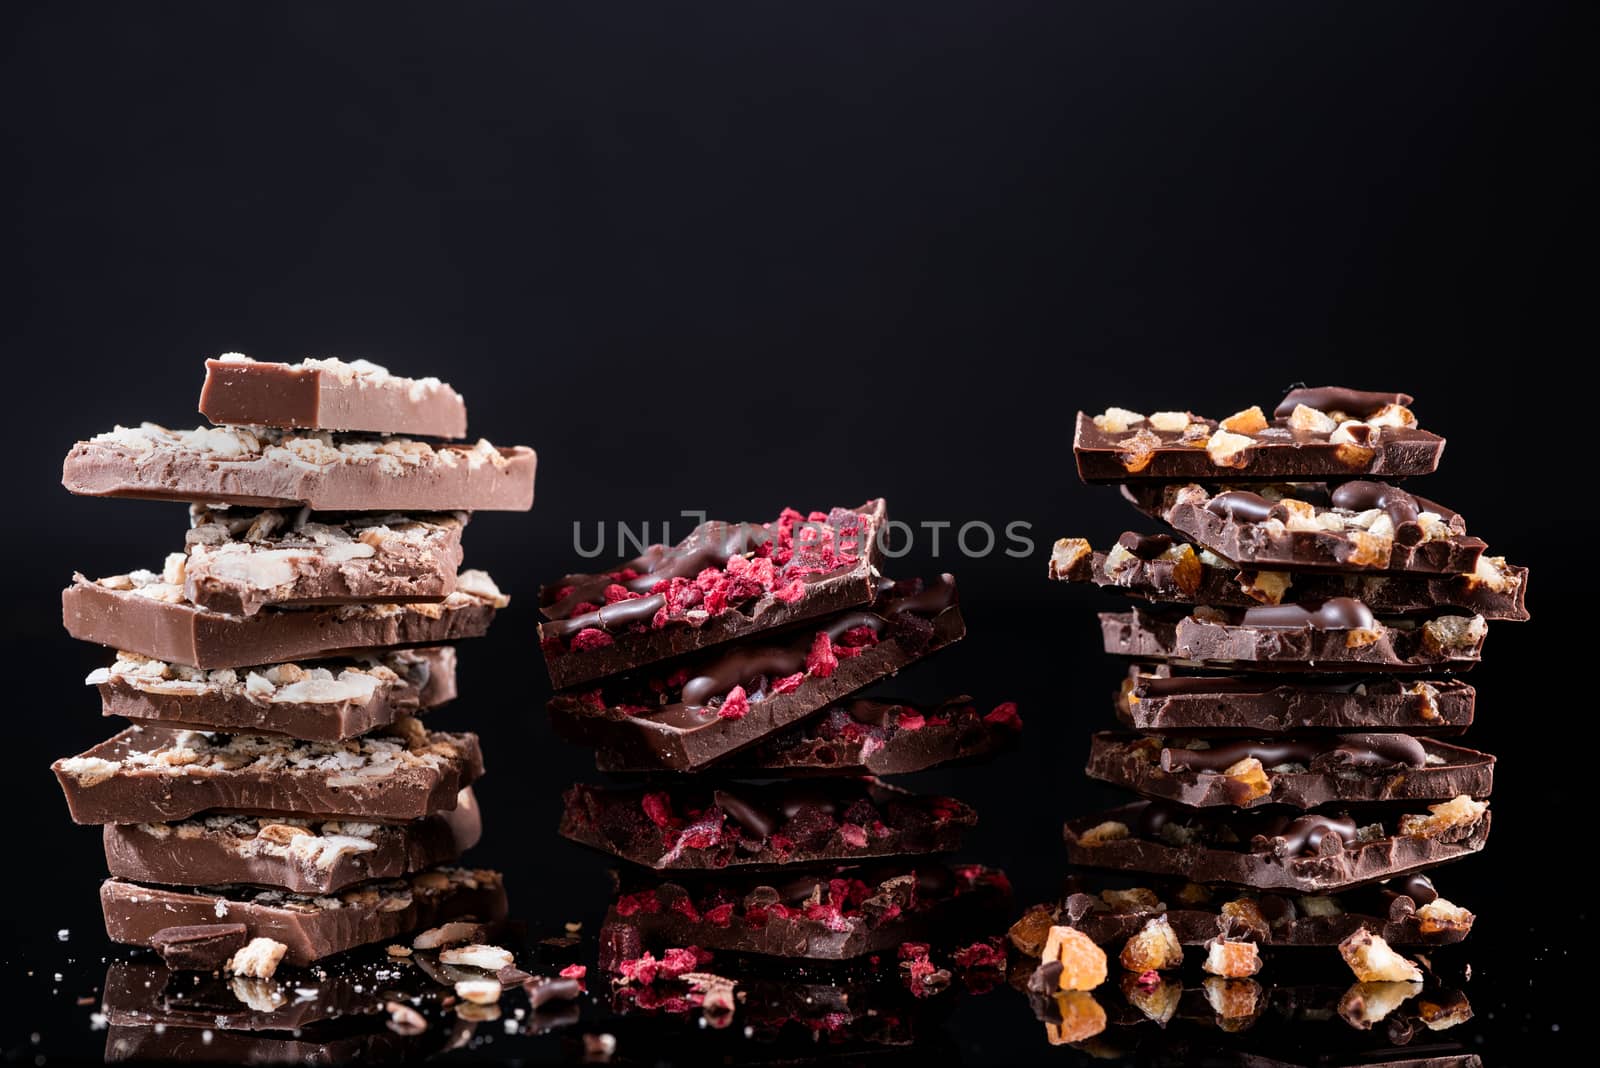 Stack of Broken Chocolate Pieces on Black Background. Copy Space. Closeup View.